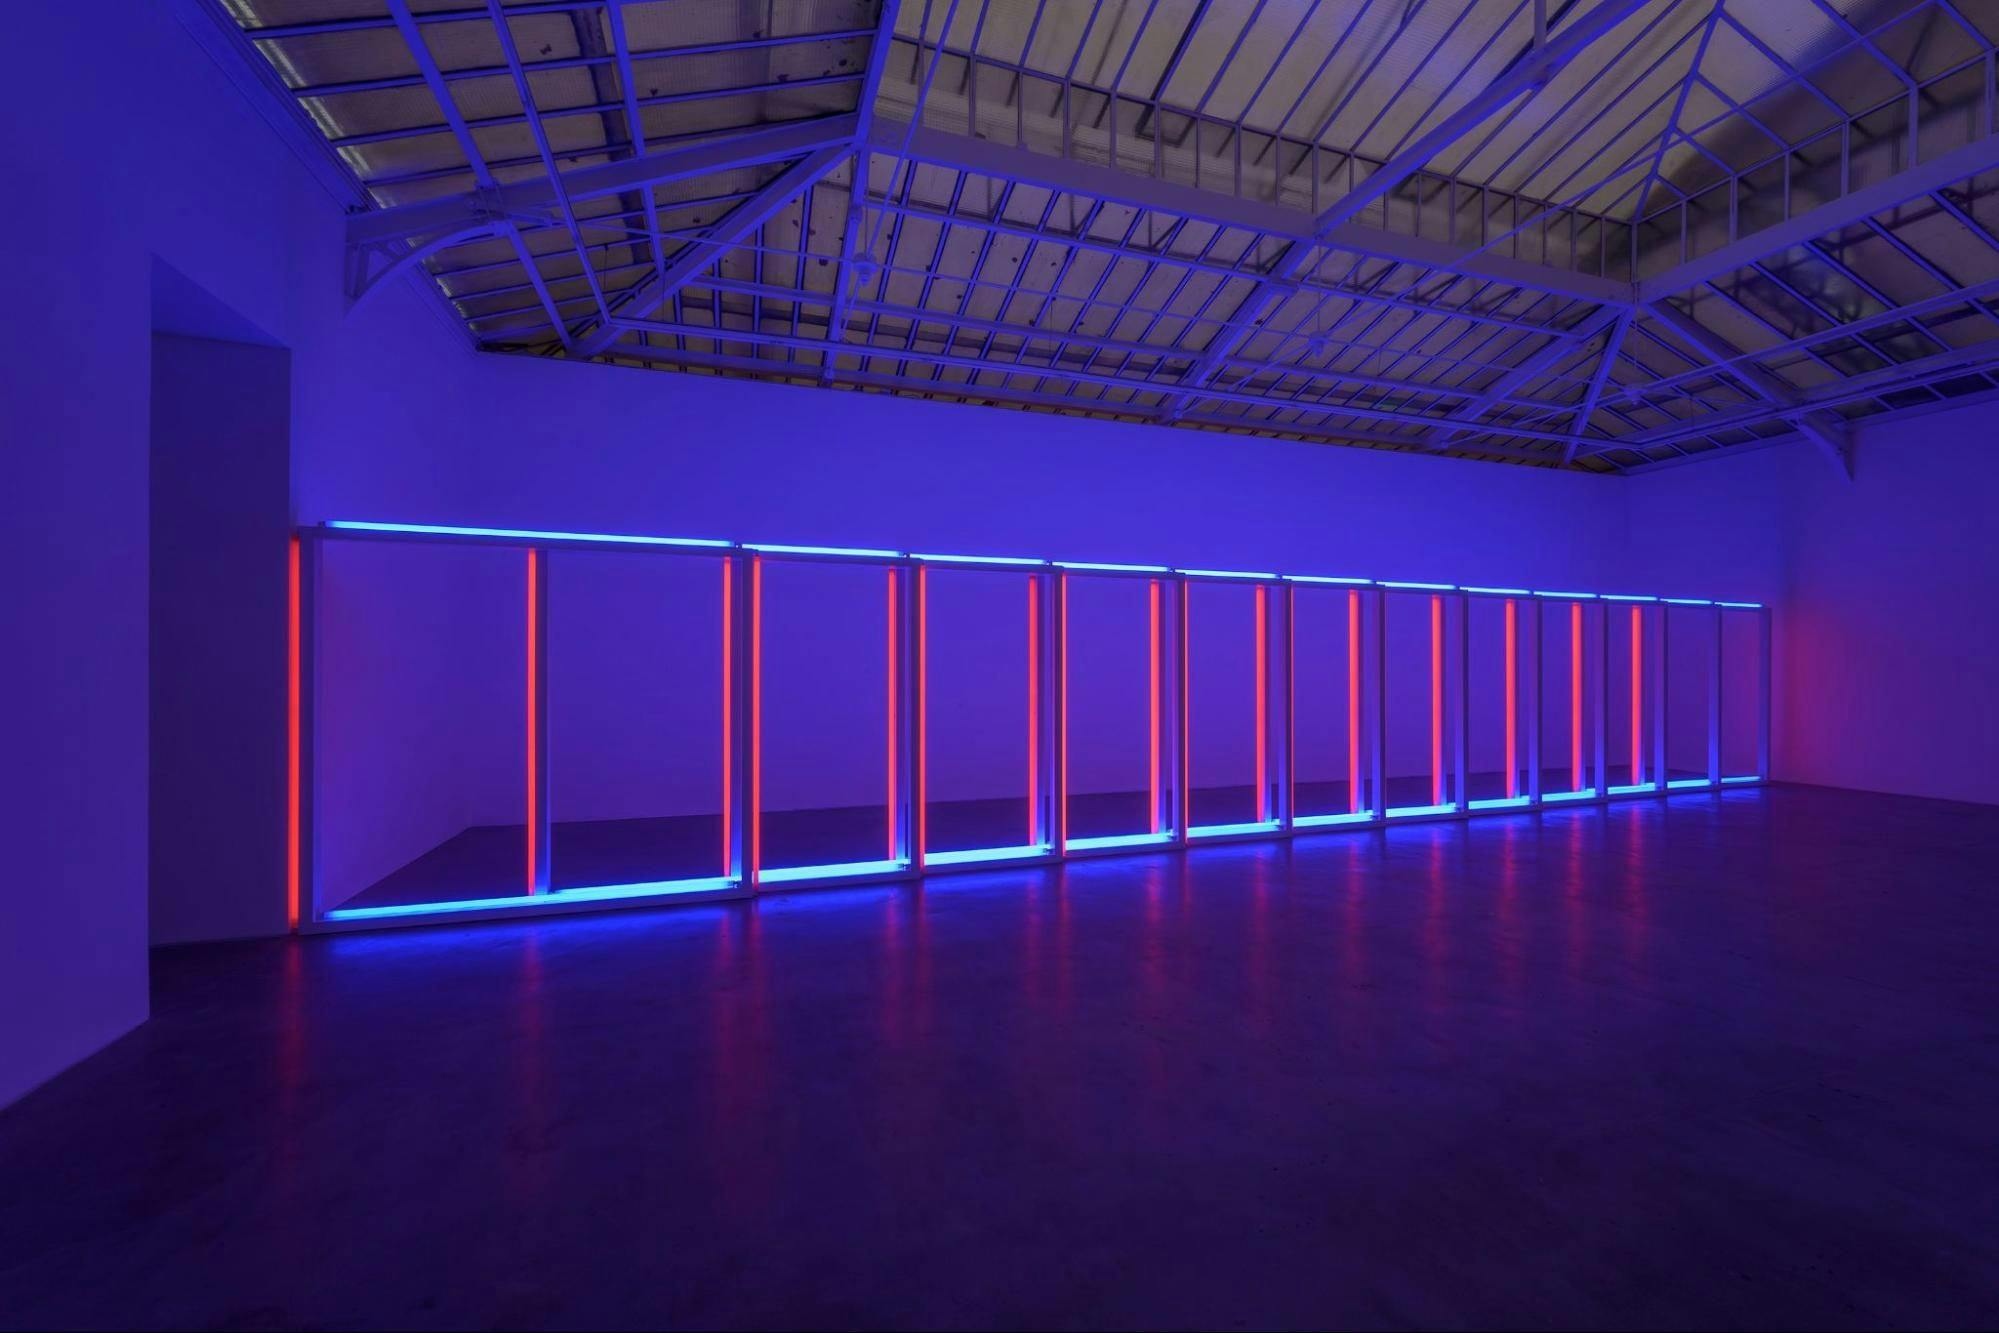 A piece by Dan Flavin titled "untitled," dated1970